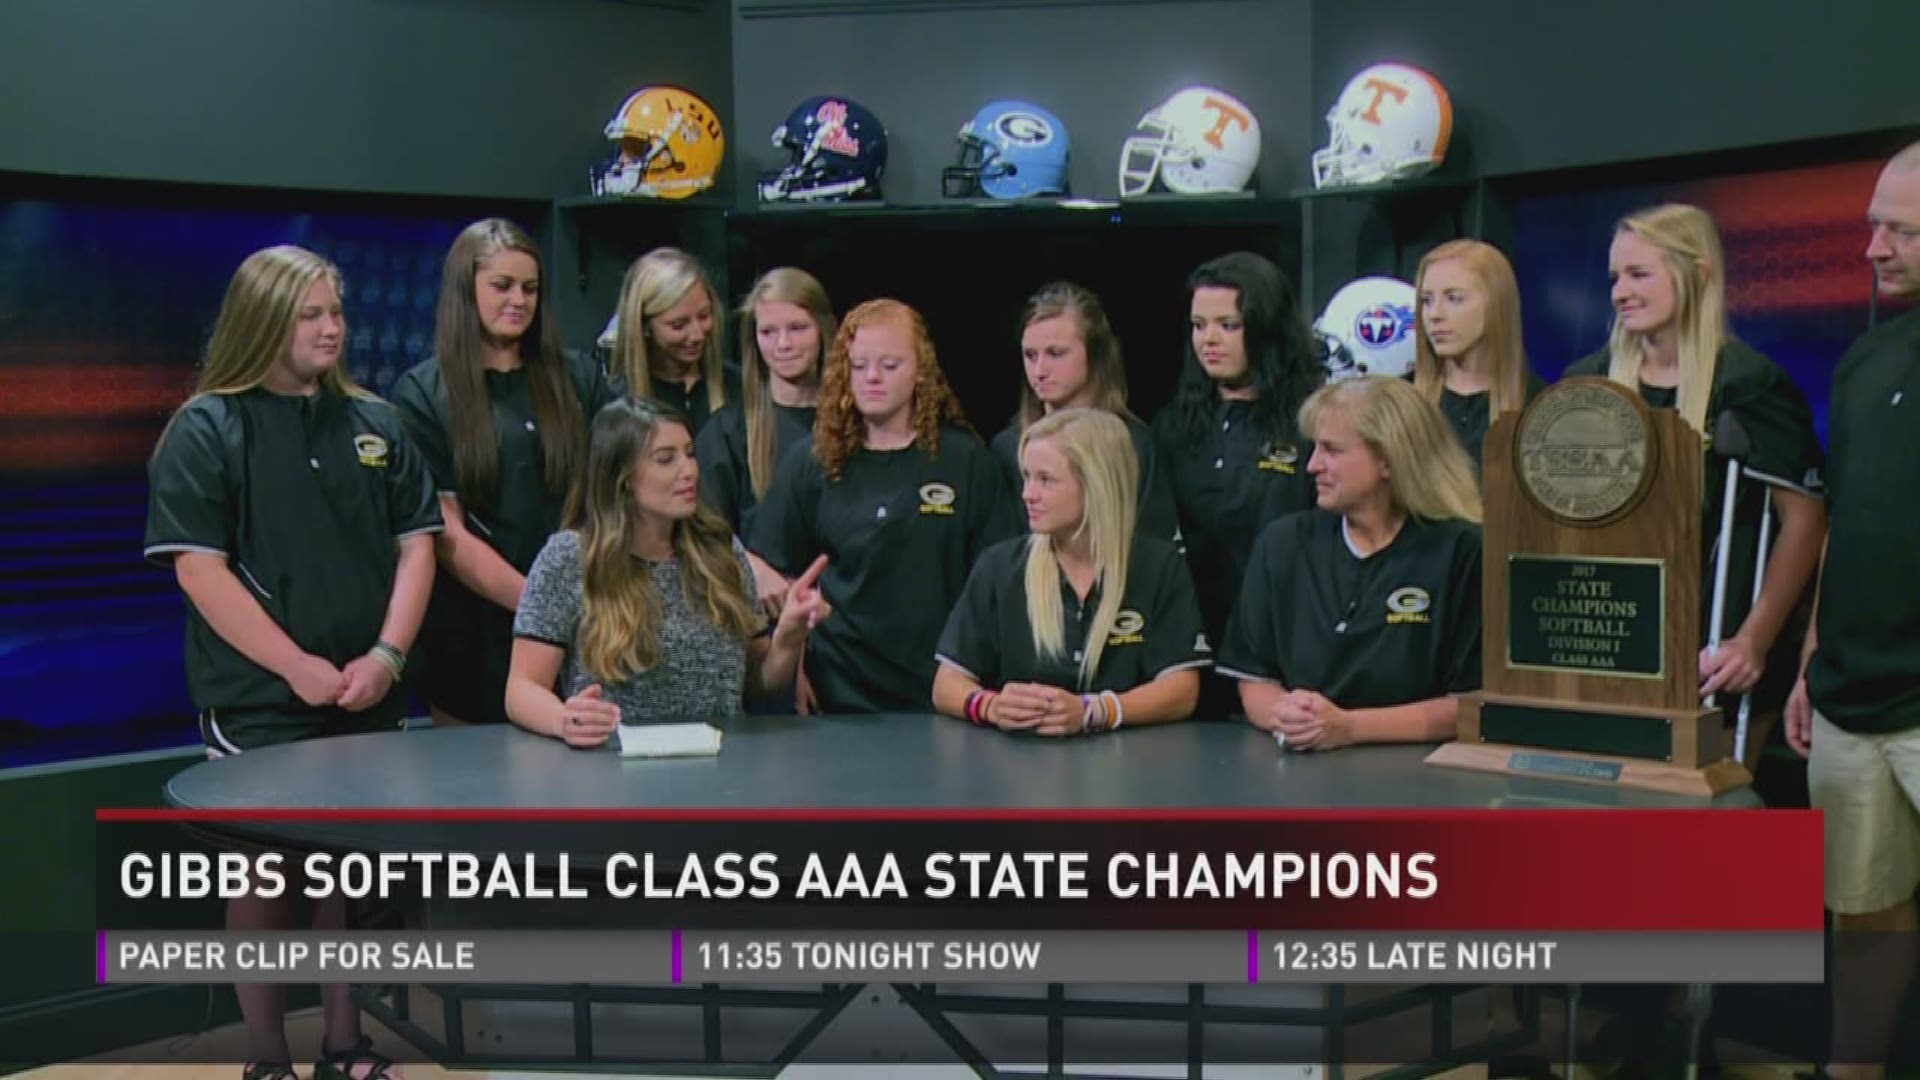 The Gibbs High School 2017 state championship visits the WBIR studio to talk about their title.